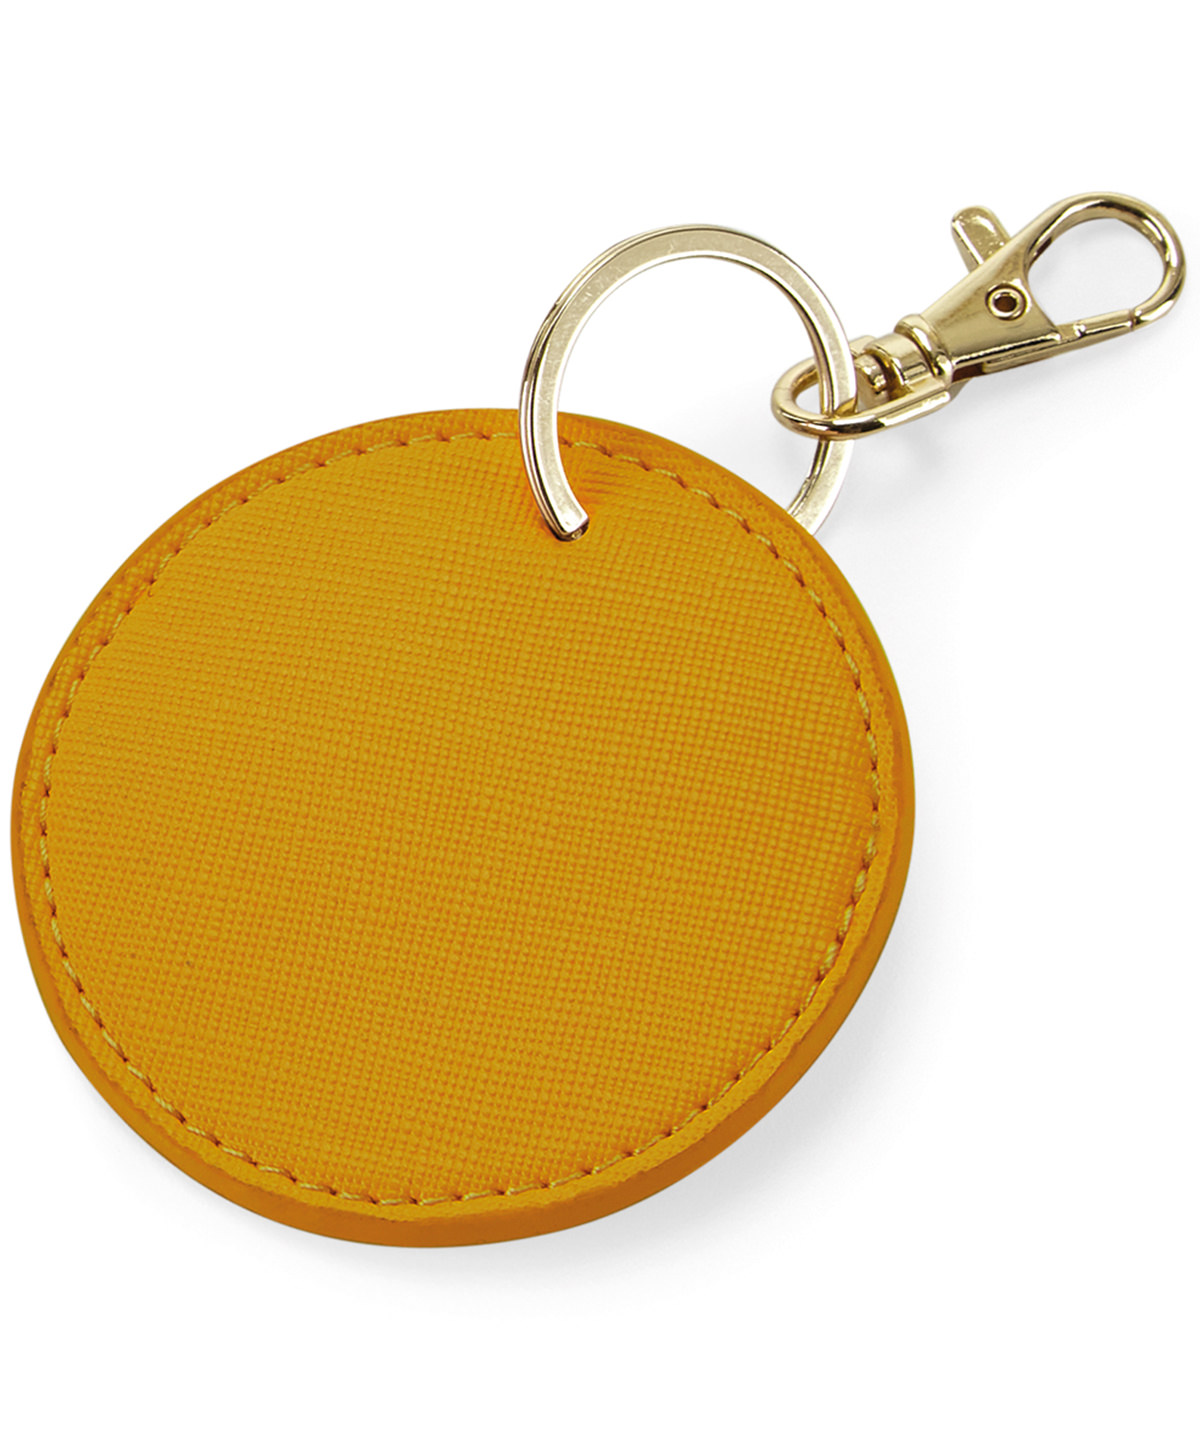 Boutique Circular Keyclip Mustard Size One Size